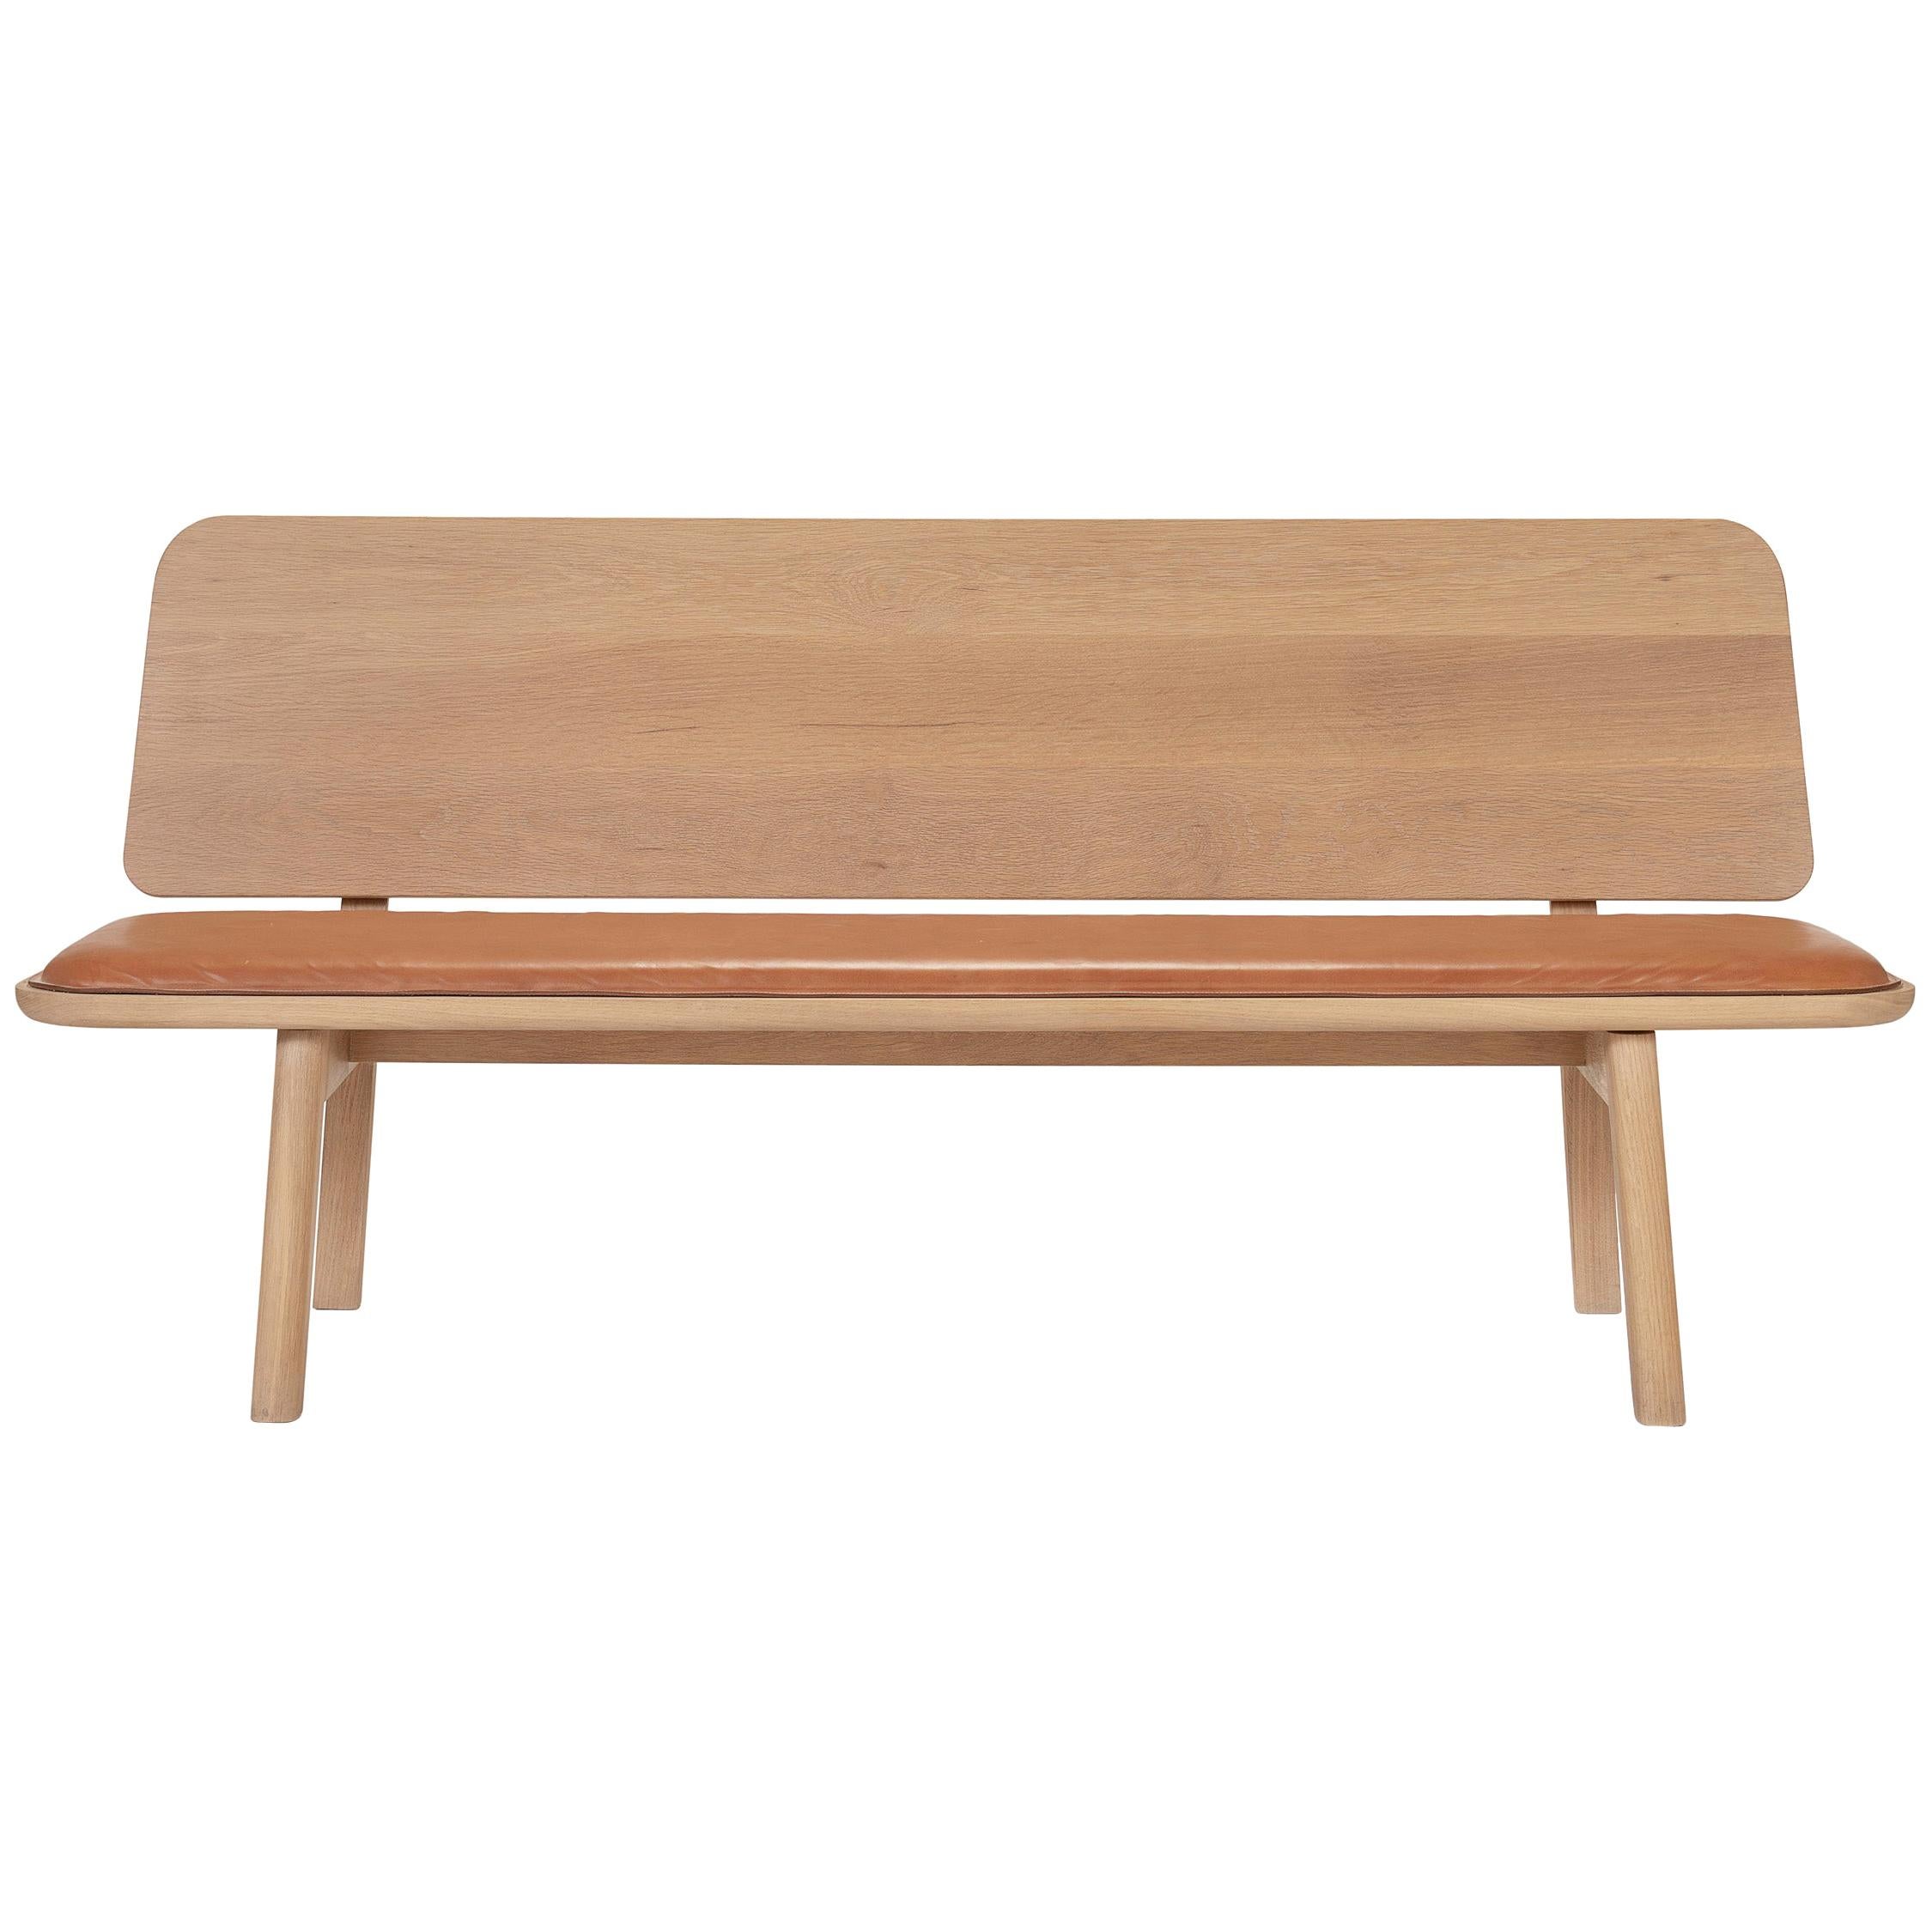 Olo Bench, Solid White Oak, Hand-Stitched Vegetable Tanned Leather Upholstery For Sale